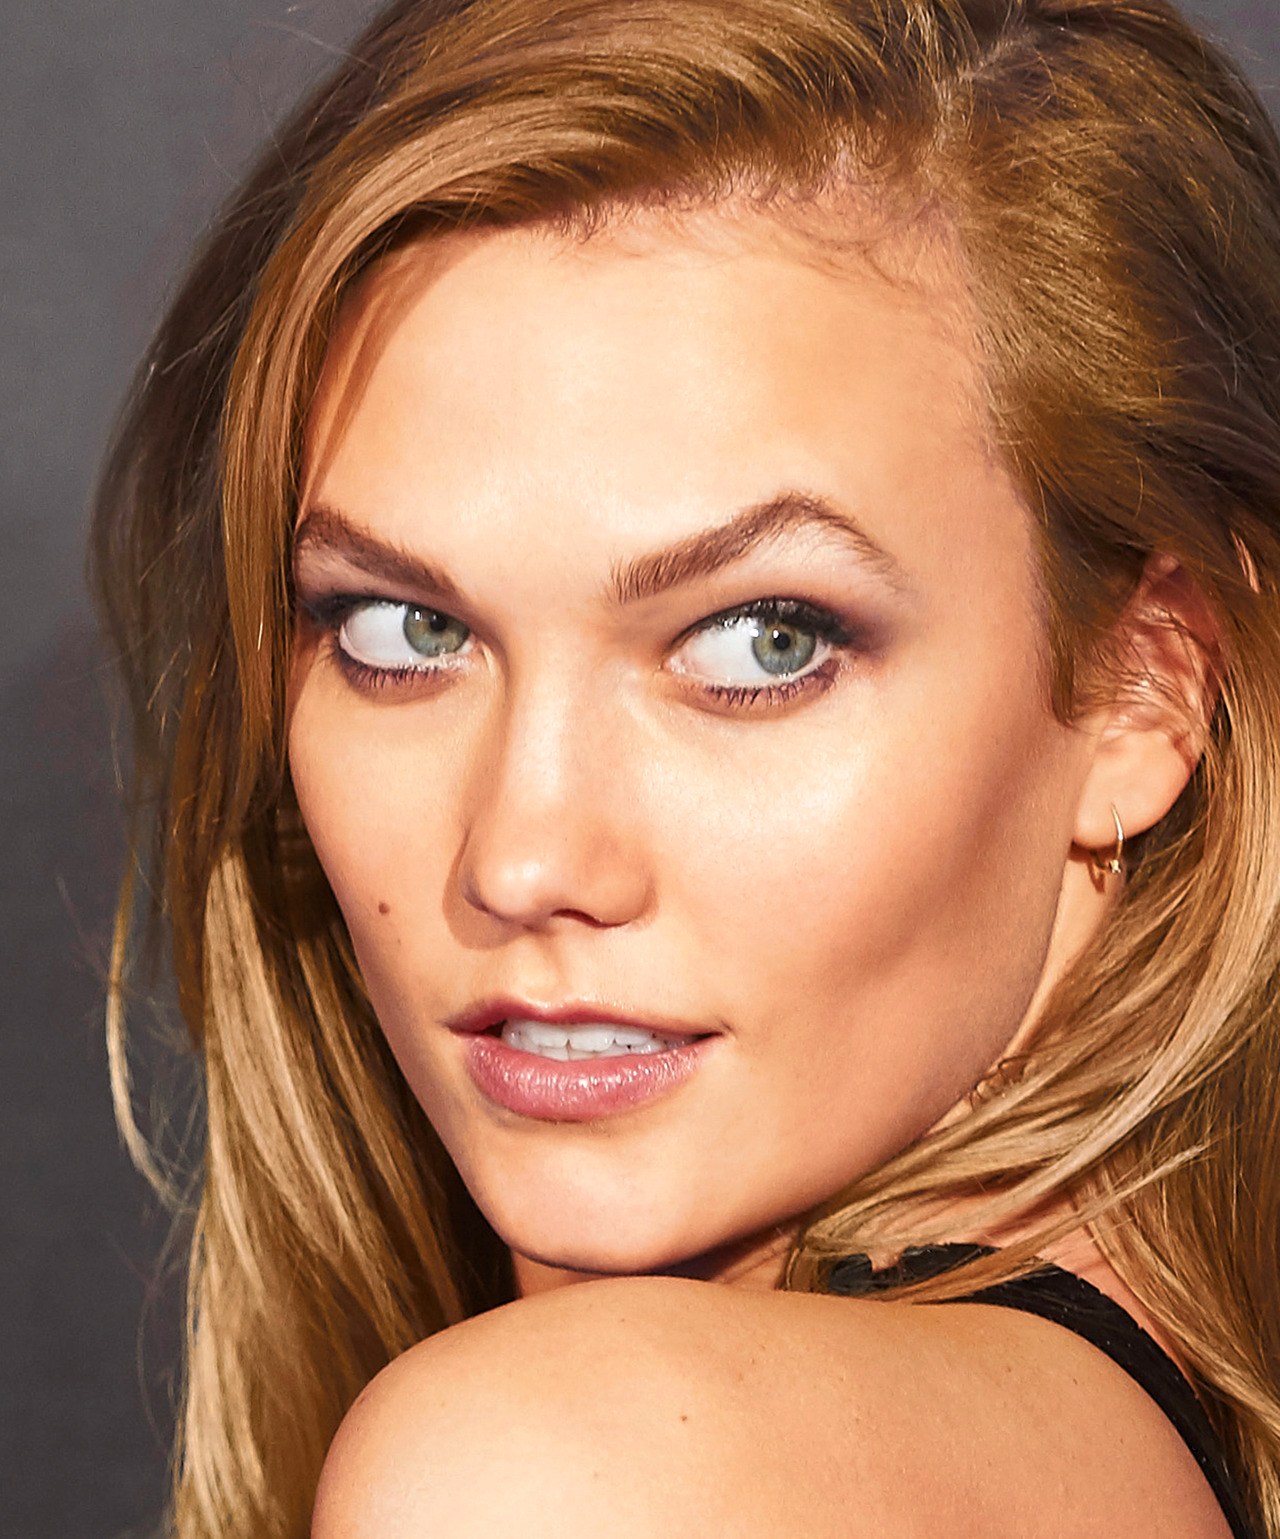 falsk [Karlie Kloss](http://www.glamour.com/about/karlie-kloss)–worthy bone structure by playing with shade and light.